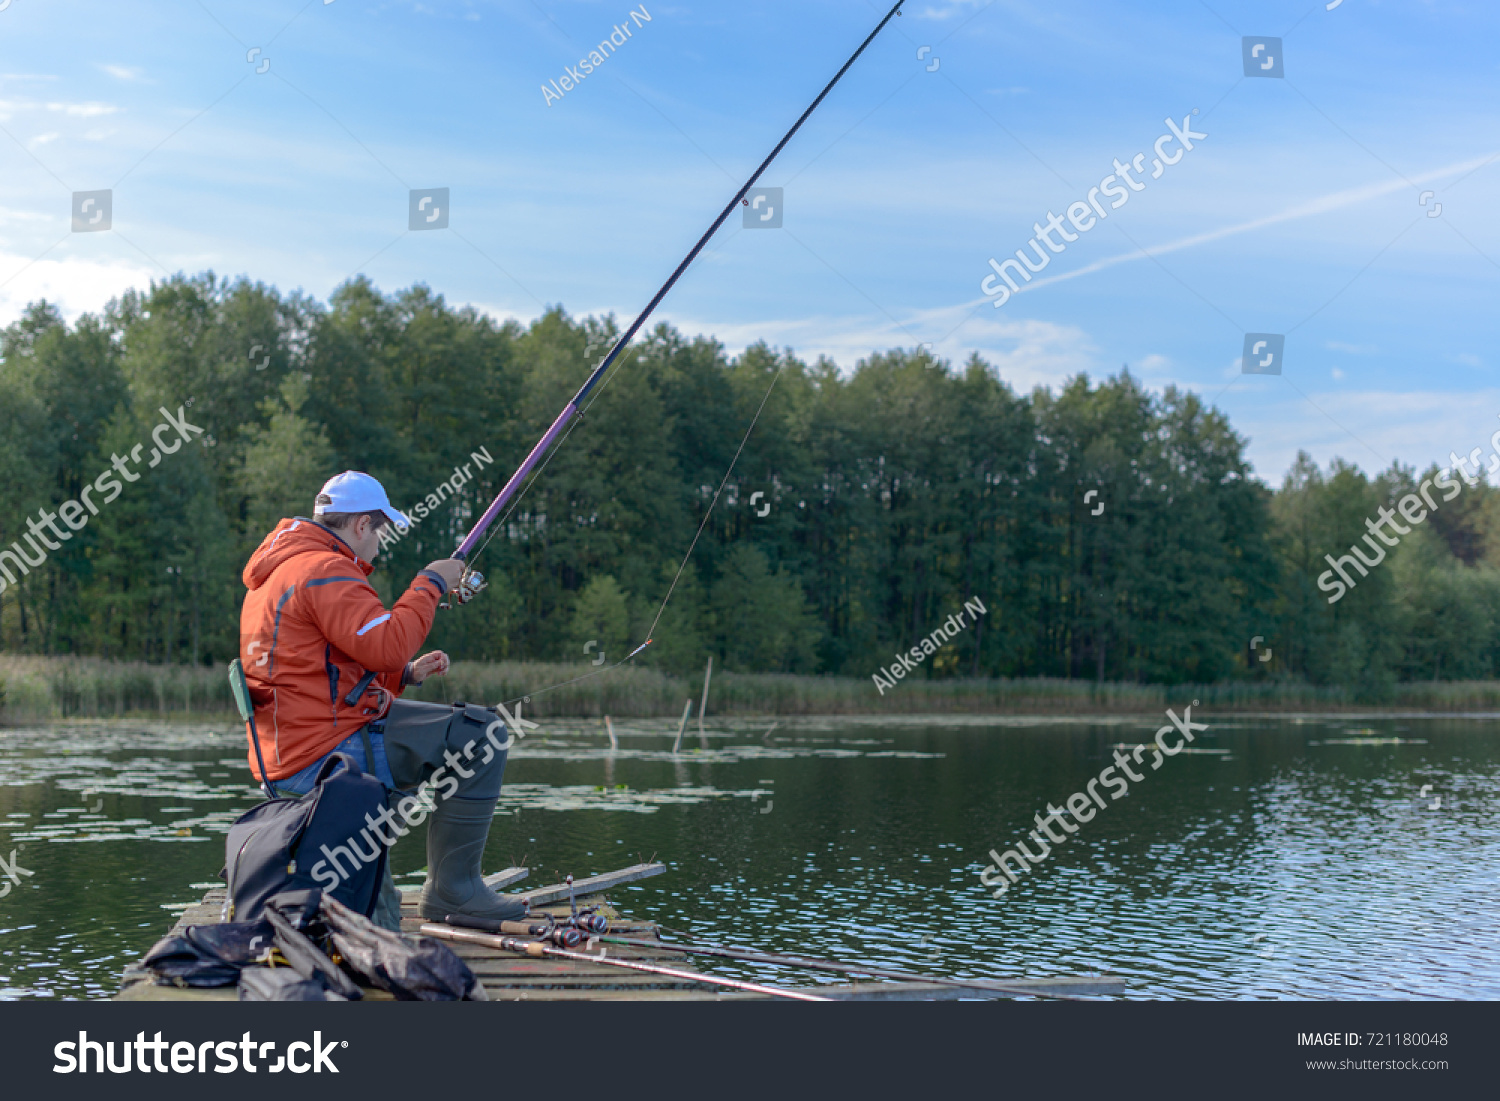 The young man catching fish on the lake from an aged pier. #721180048